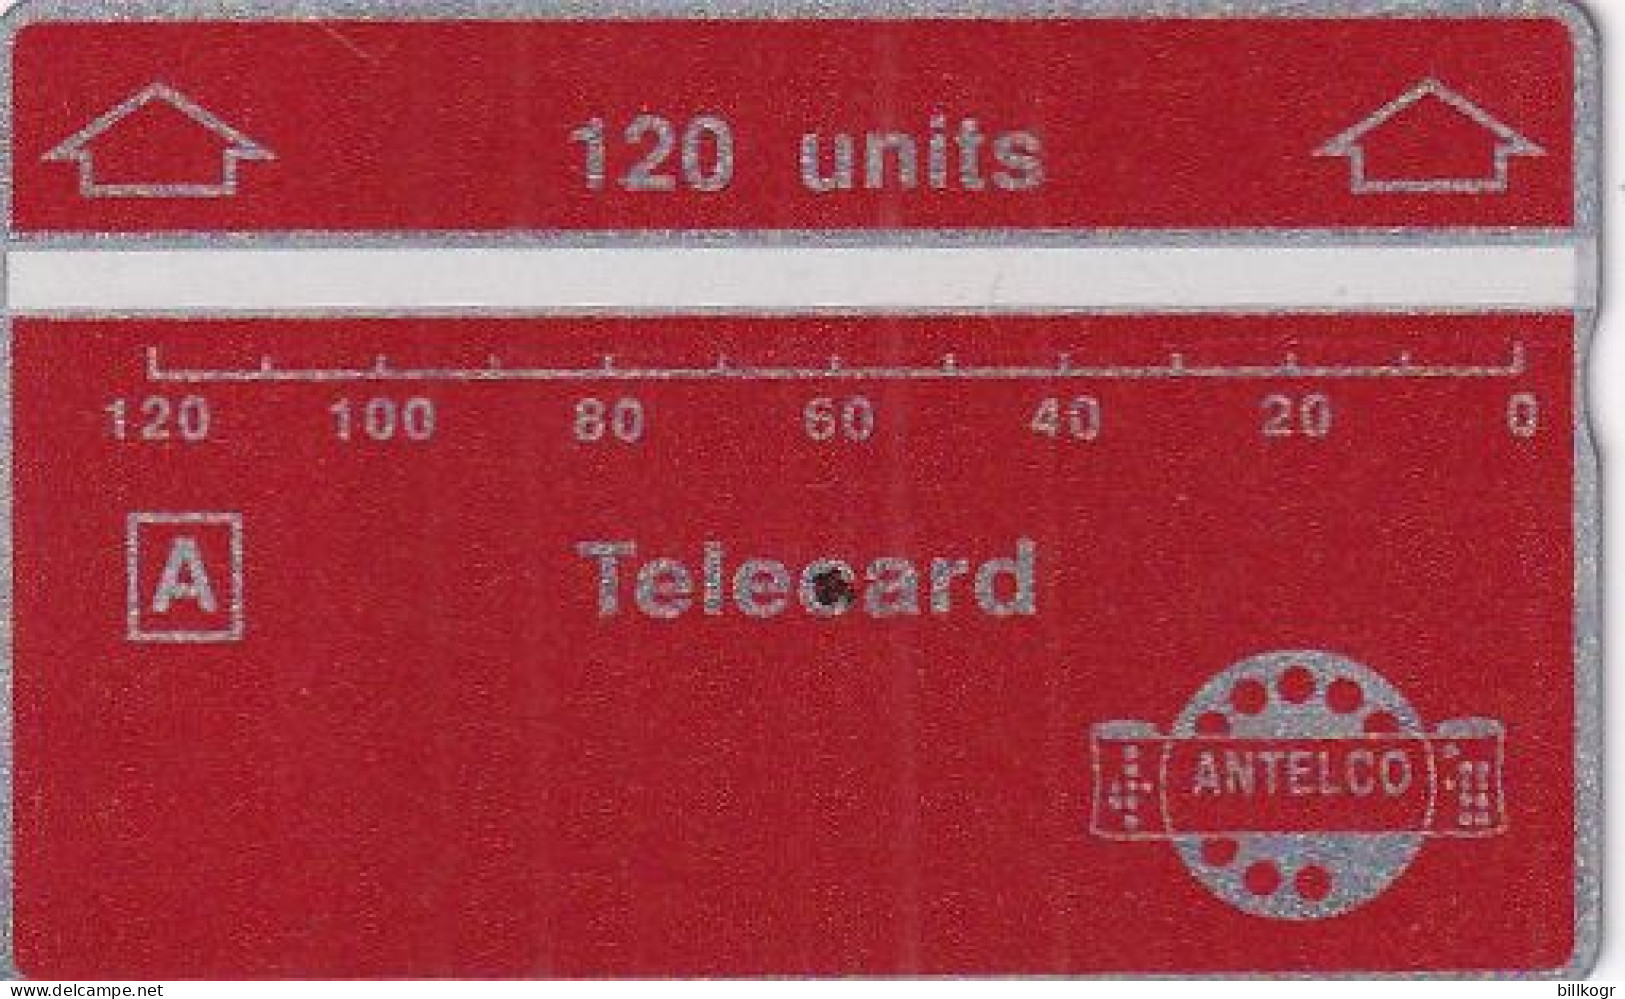 PARAGUAY(L&G) - ANTELCO Telecard 120 Units, First Issue, CN : 901A, Mint - Paraguay